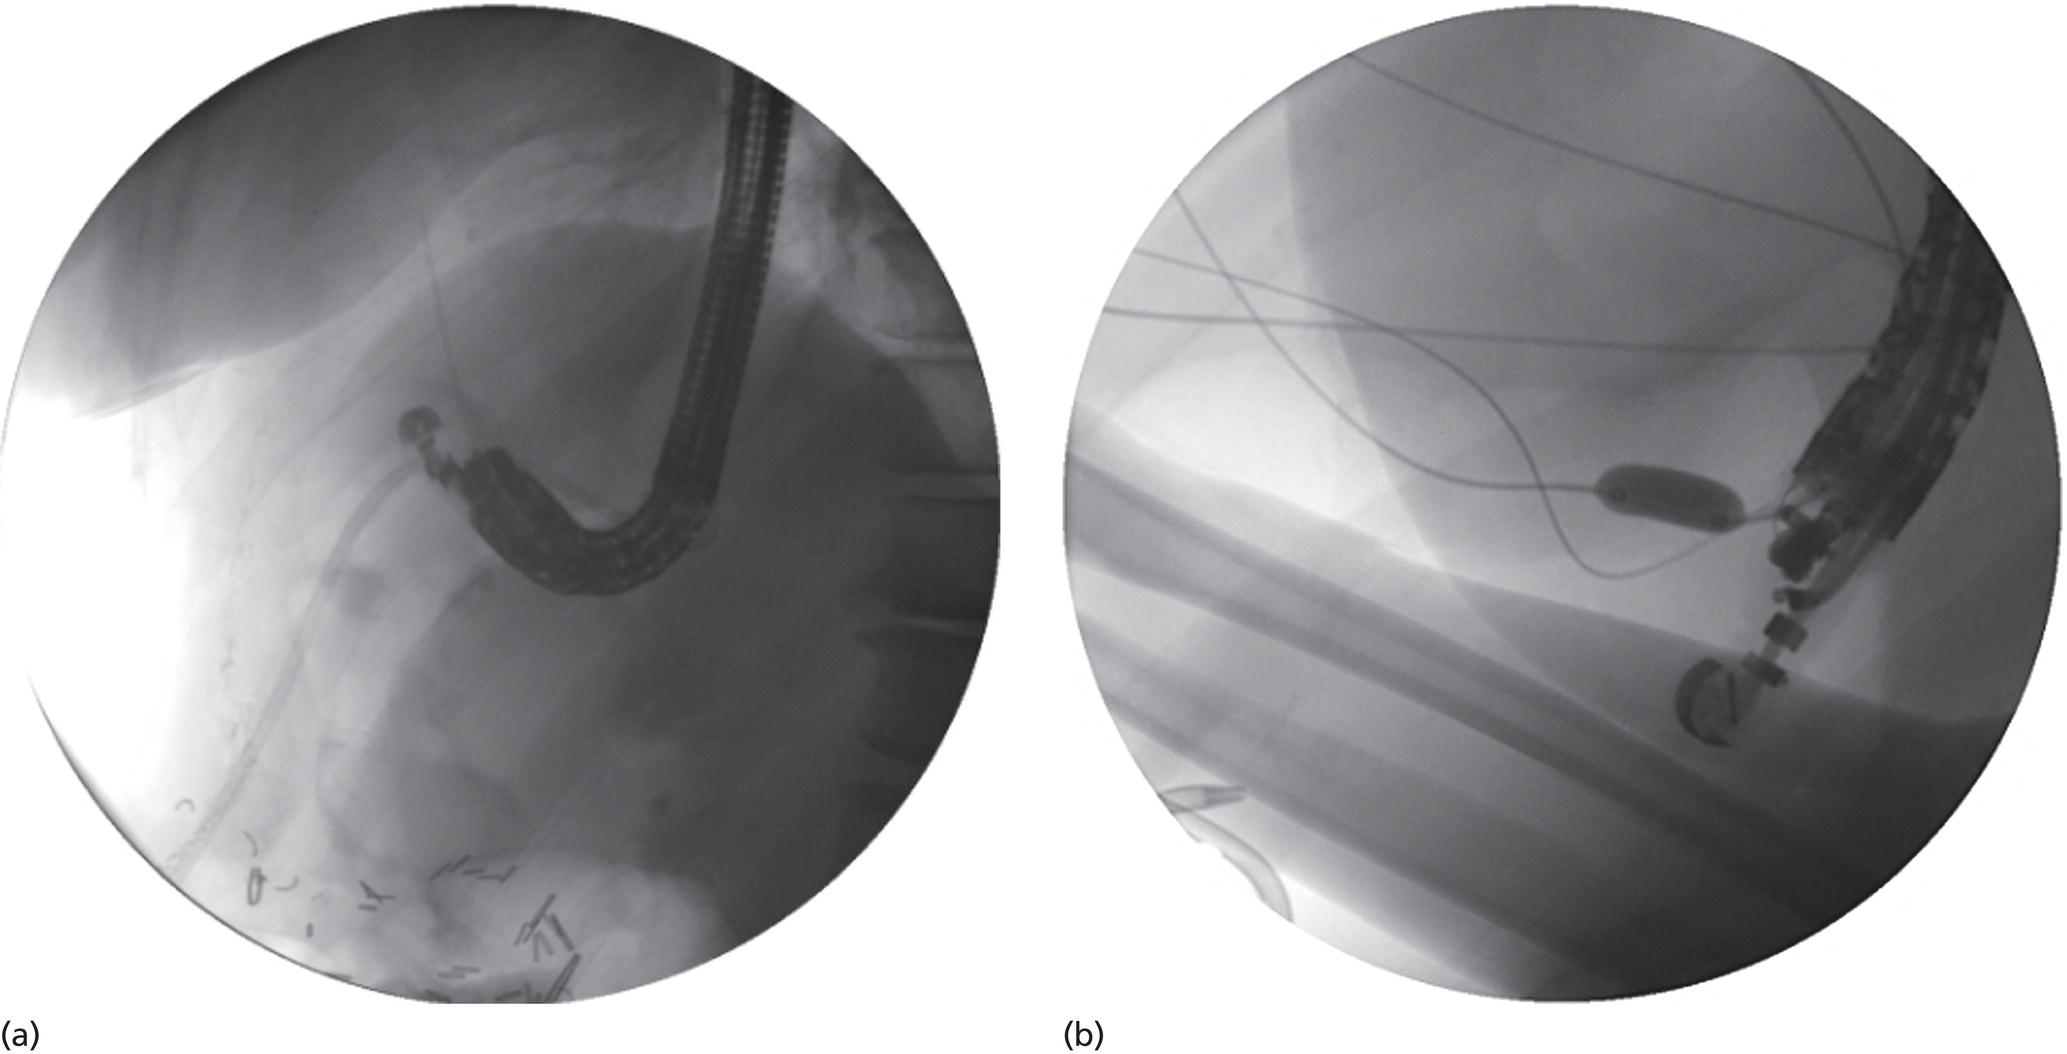 Photos depict (a) Acute angulation encountered when the echoendoscope is located in the gastric fundus. (b) The tip of the echoendoscope is subsequently straightened with aid of fluoroscopy to facilitate passage of accessories.